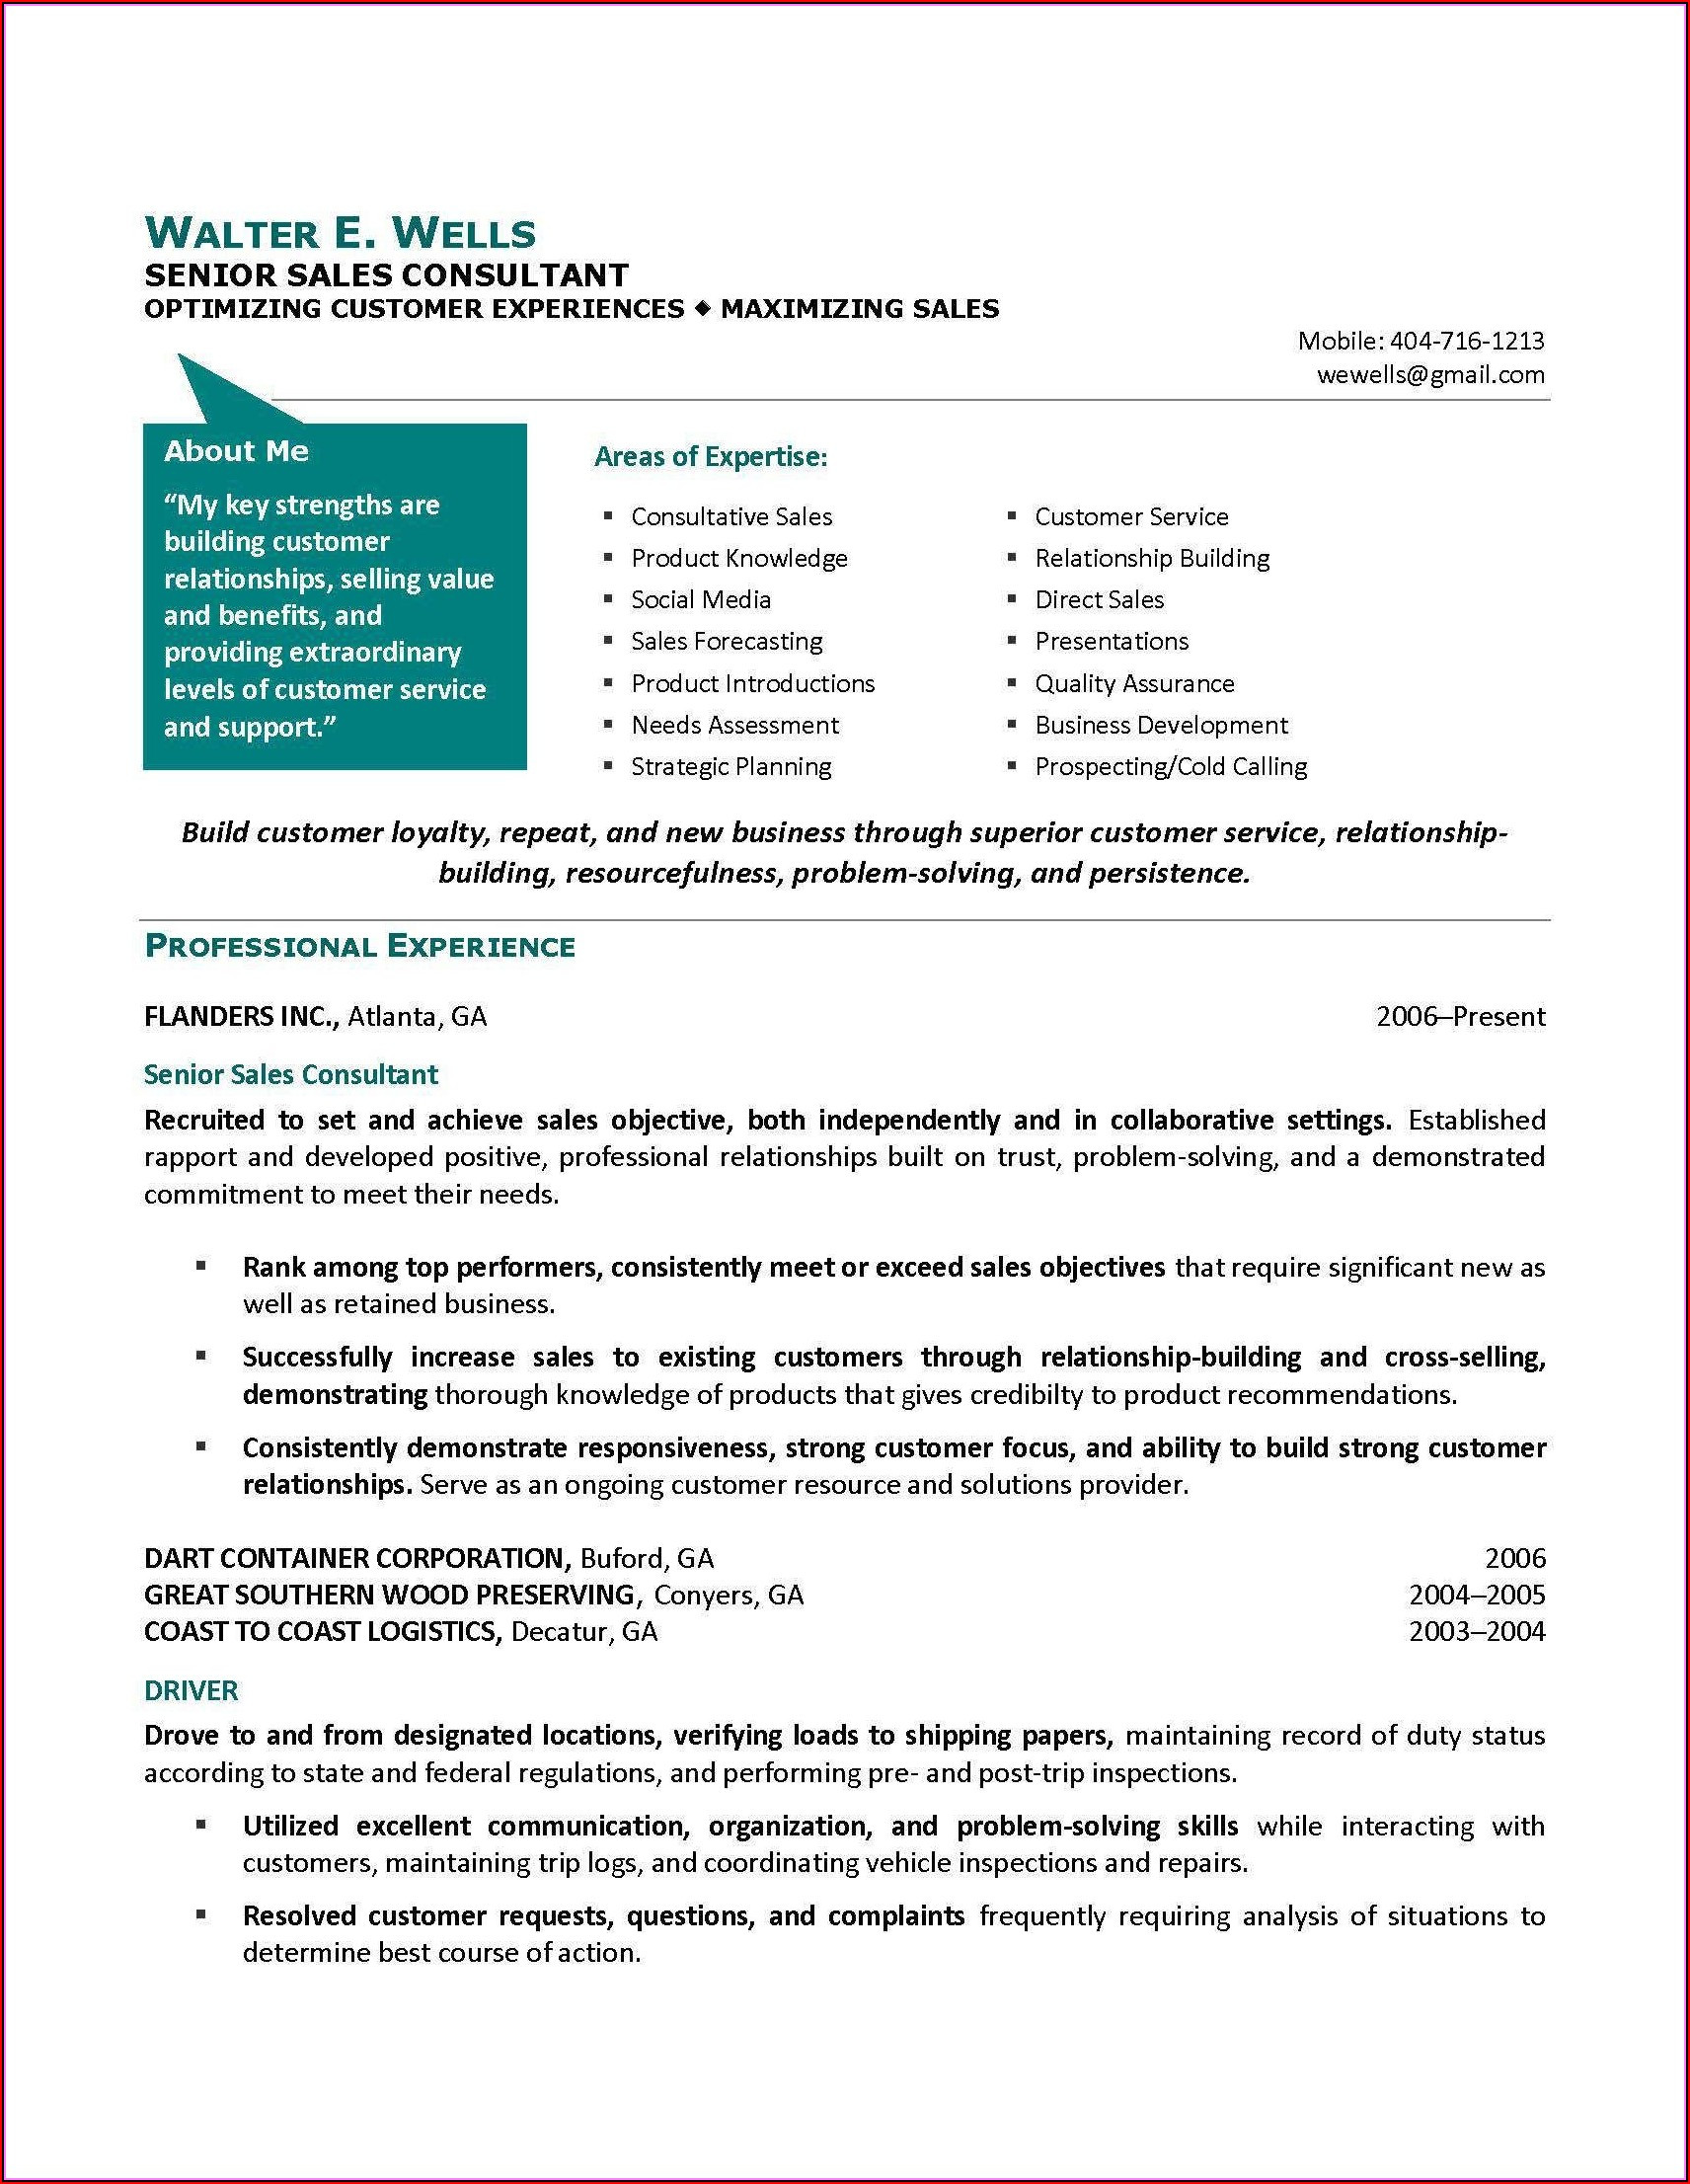 Sample Resume for Sap Security Consultant Cover Letter for Sap Security Consultant October 2021